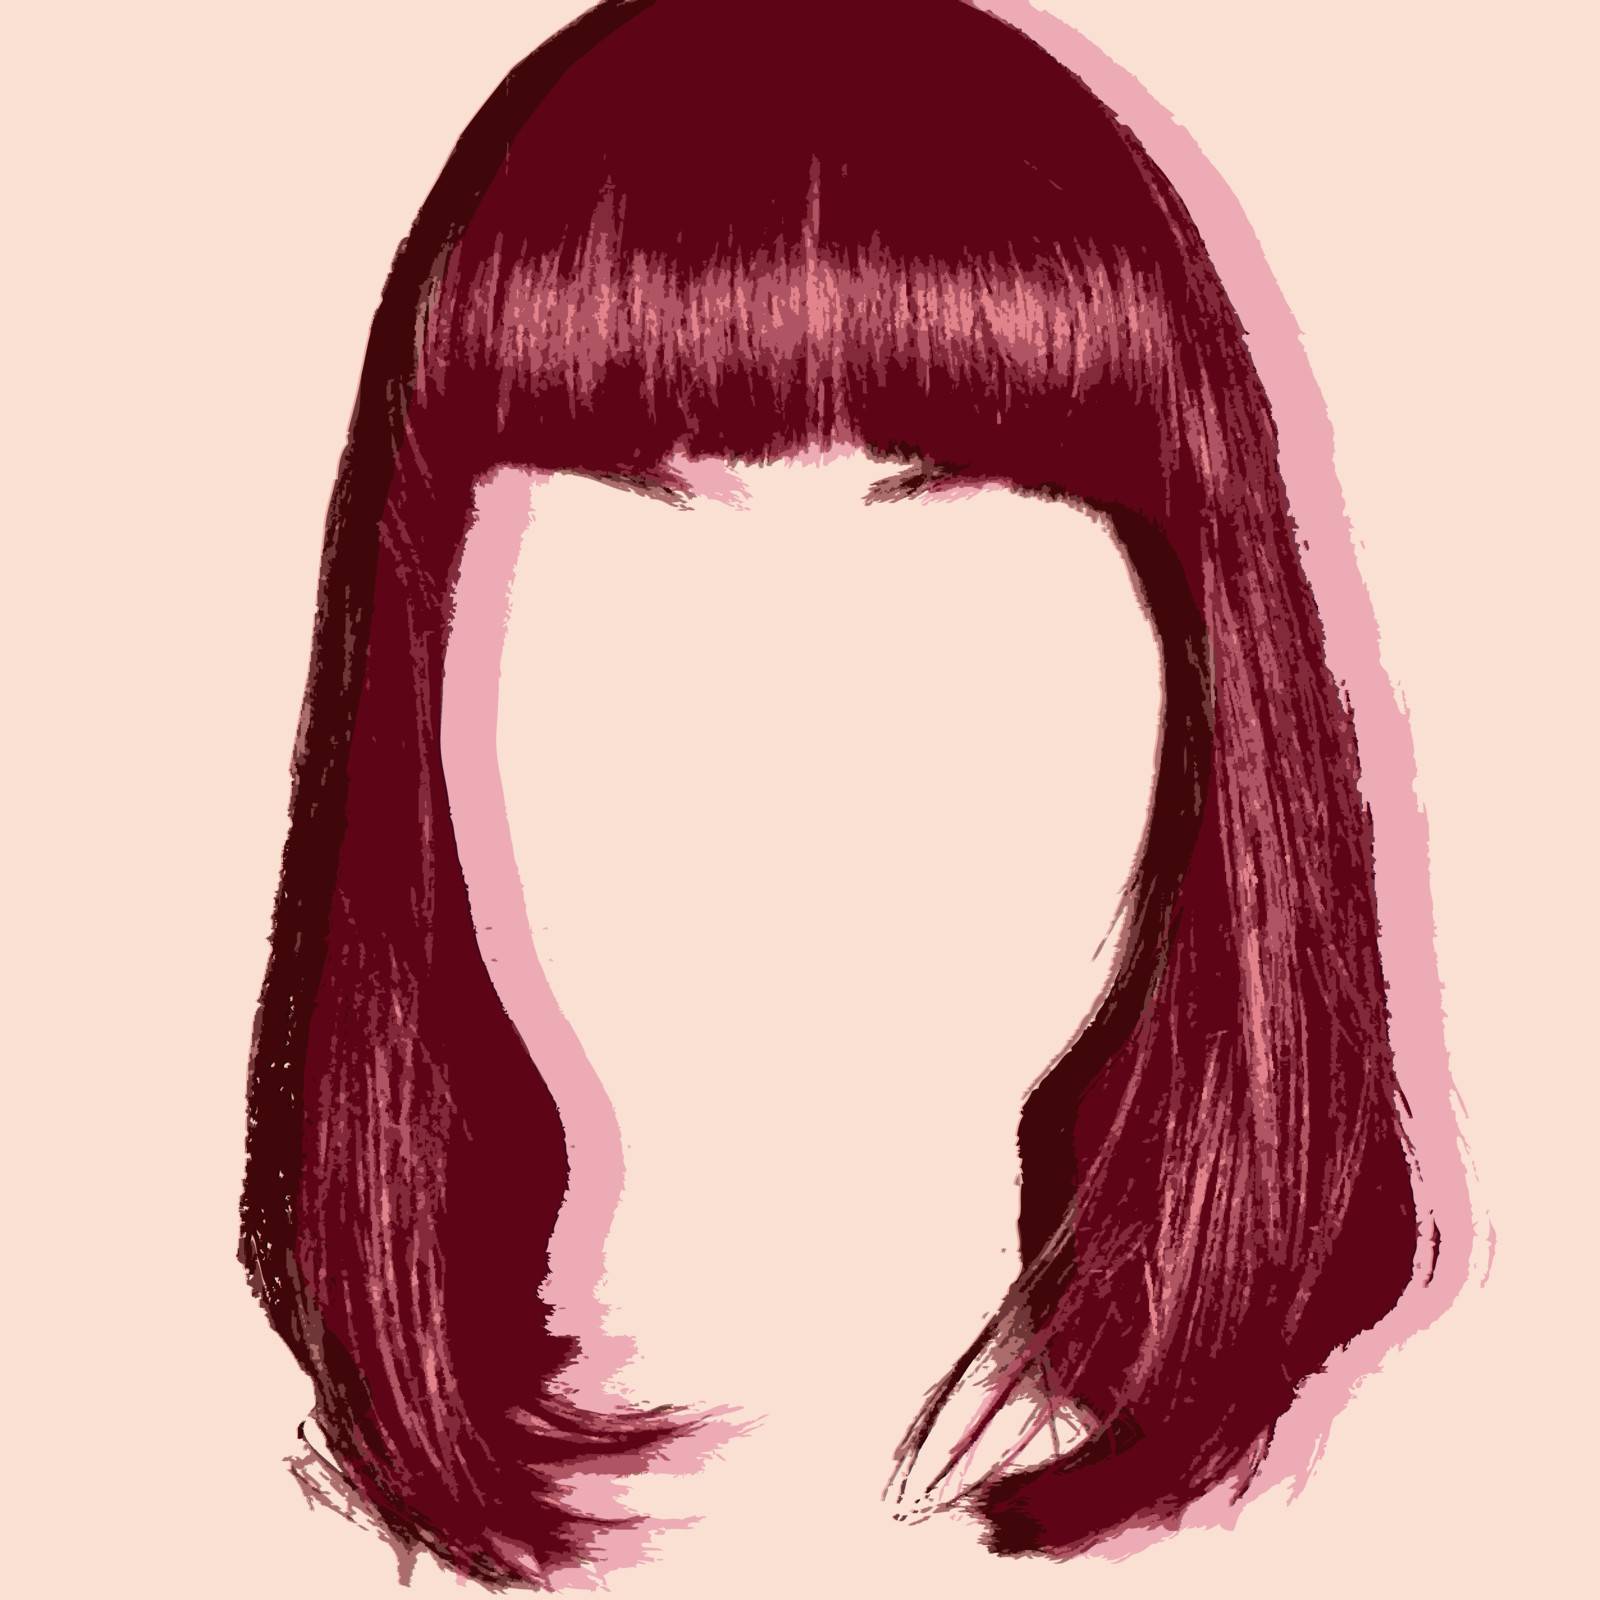 haircut pop art style by catrinel